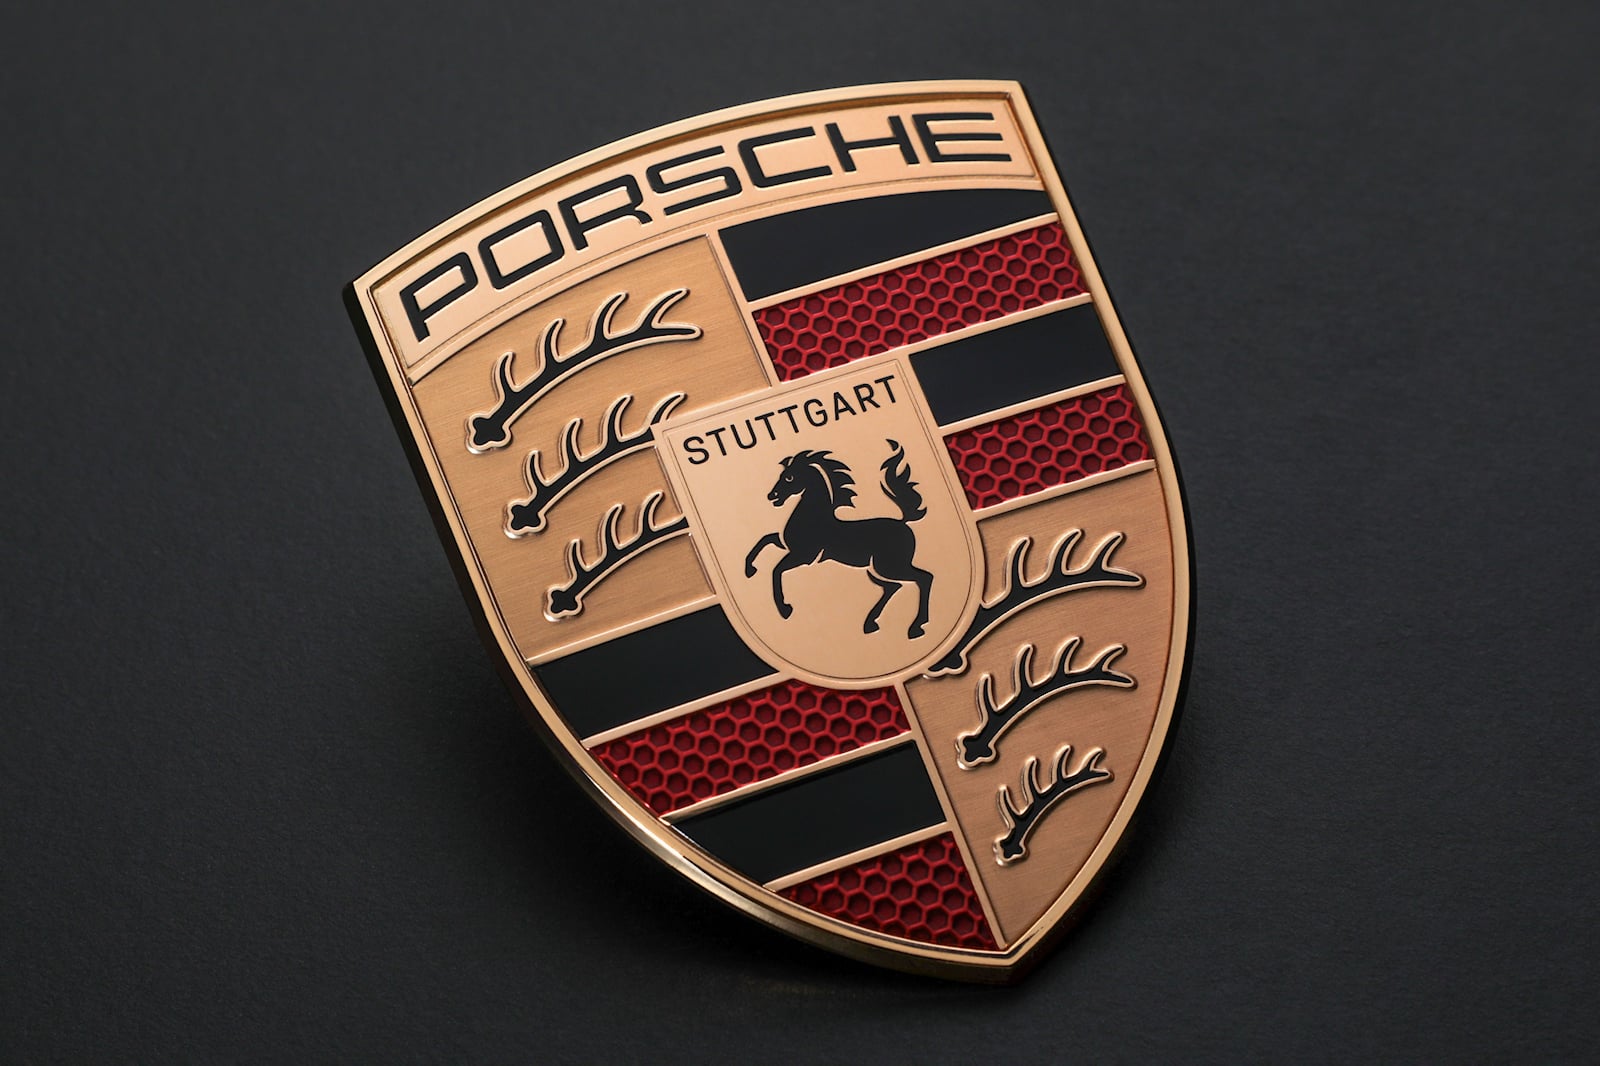 Porsche Has A New Logo For The First Time In 15 Years